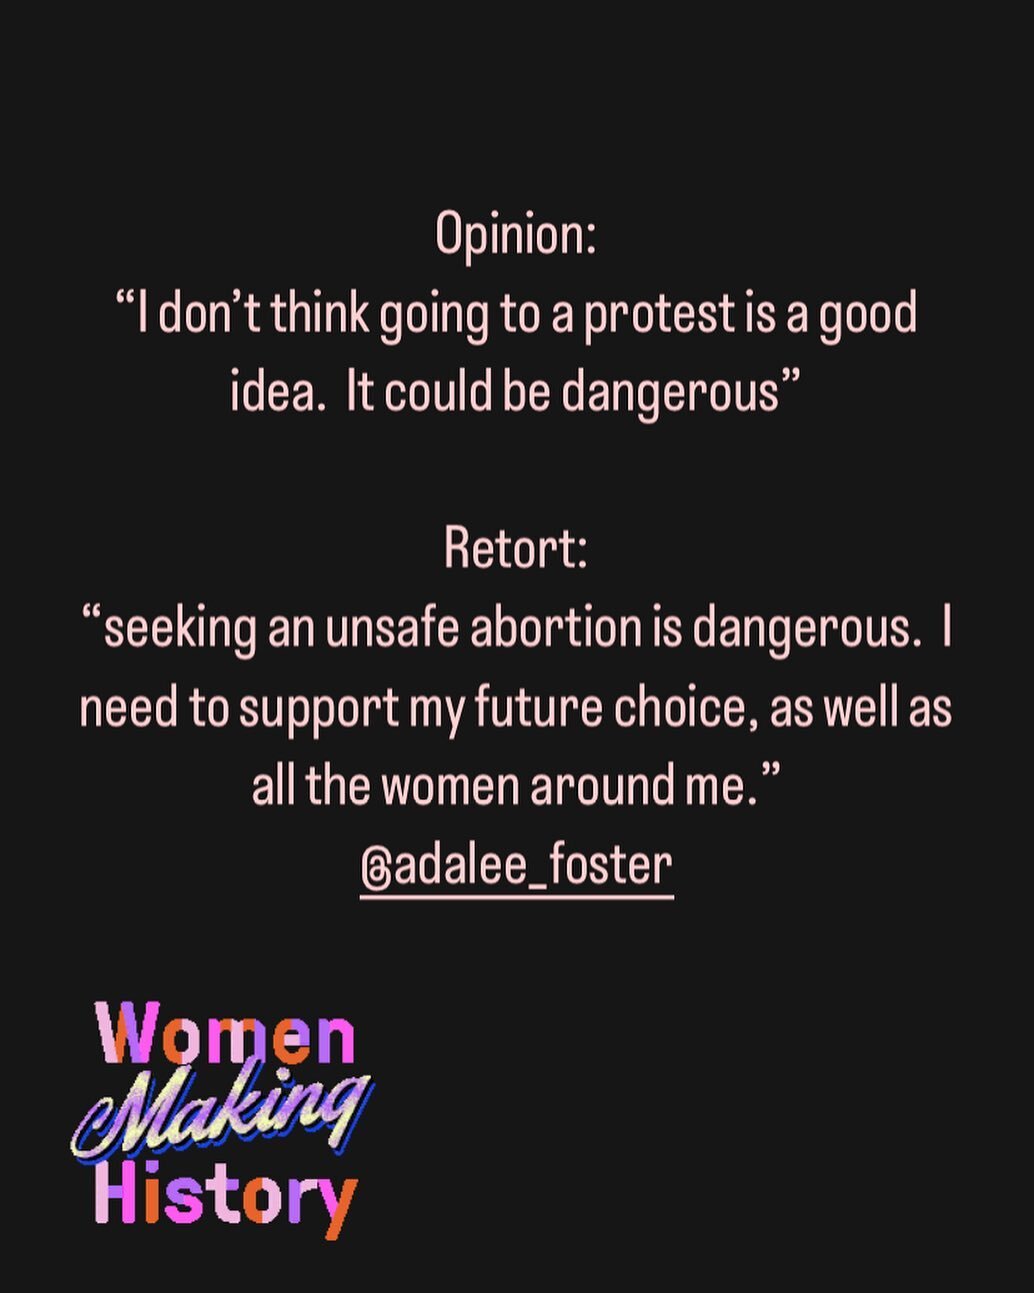 I was floored by my 14 year olds reply when a parent suggested she reconsider attending a protest in support of both women&rsquo;s  and fetal rights. &ldquo;Unsafe abortion should be illegal- not abortion in general&rdquo; she proclaimed, after this 